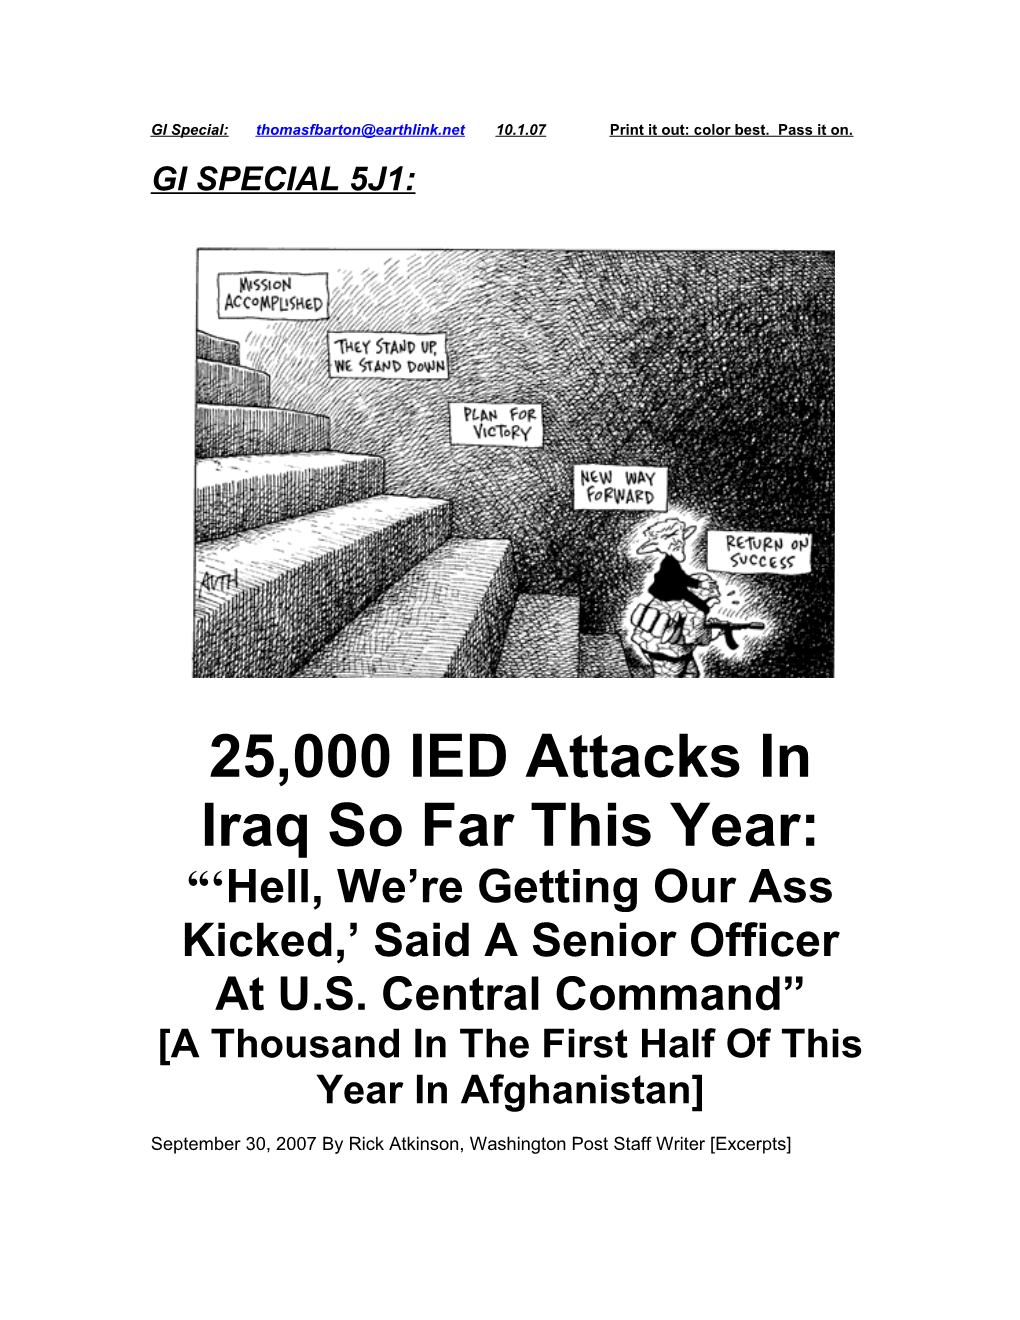 25,000 IED Attacks in Iraq So Far This Year